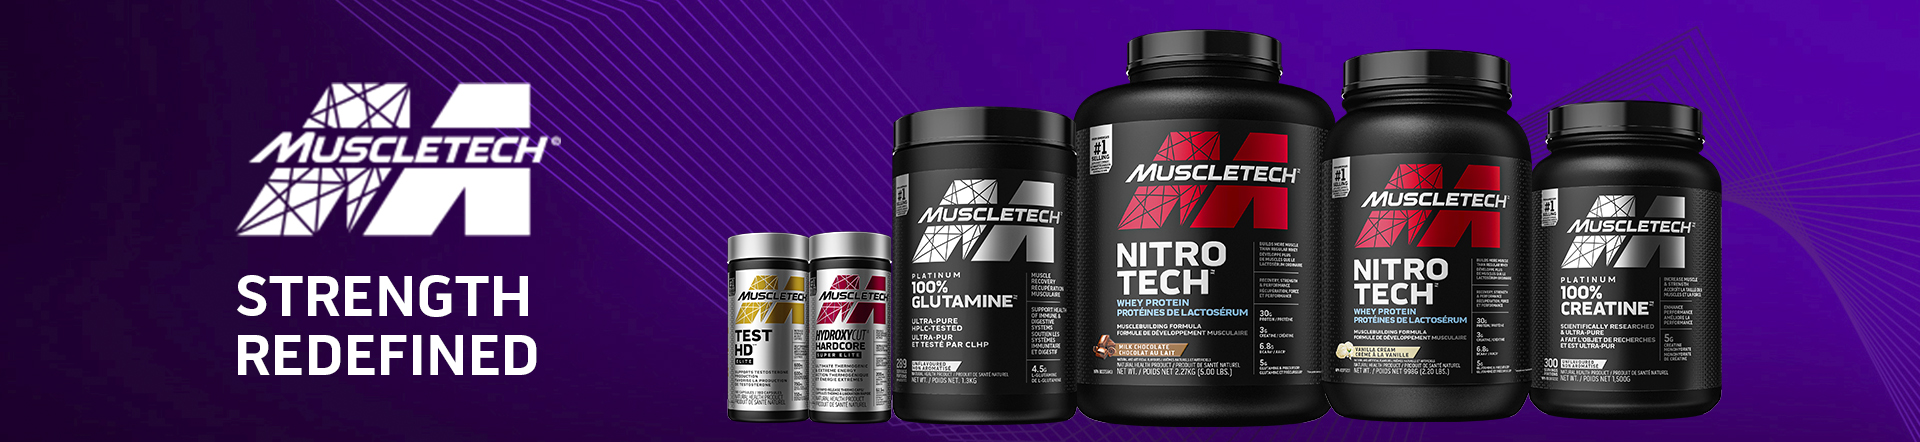 Muscletech - Strength Redefined